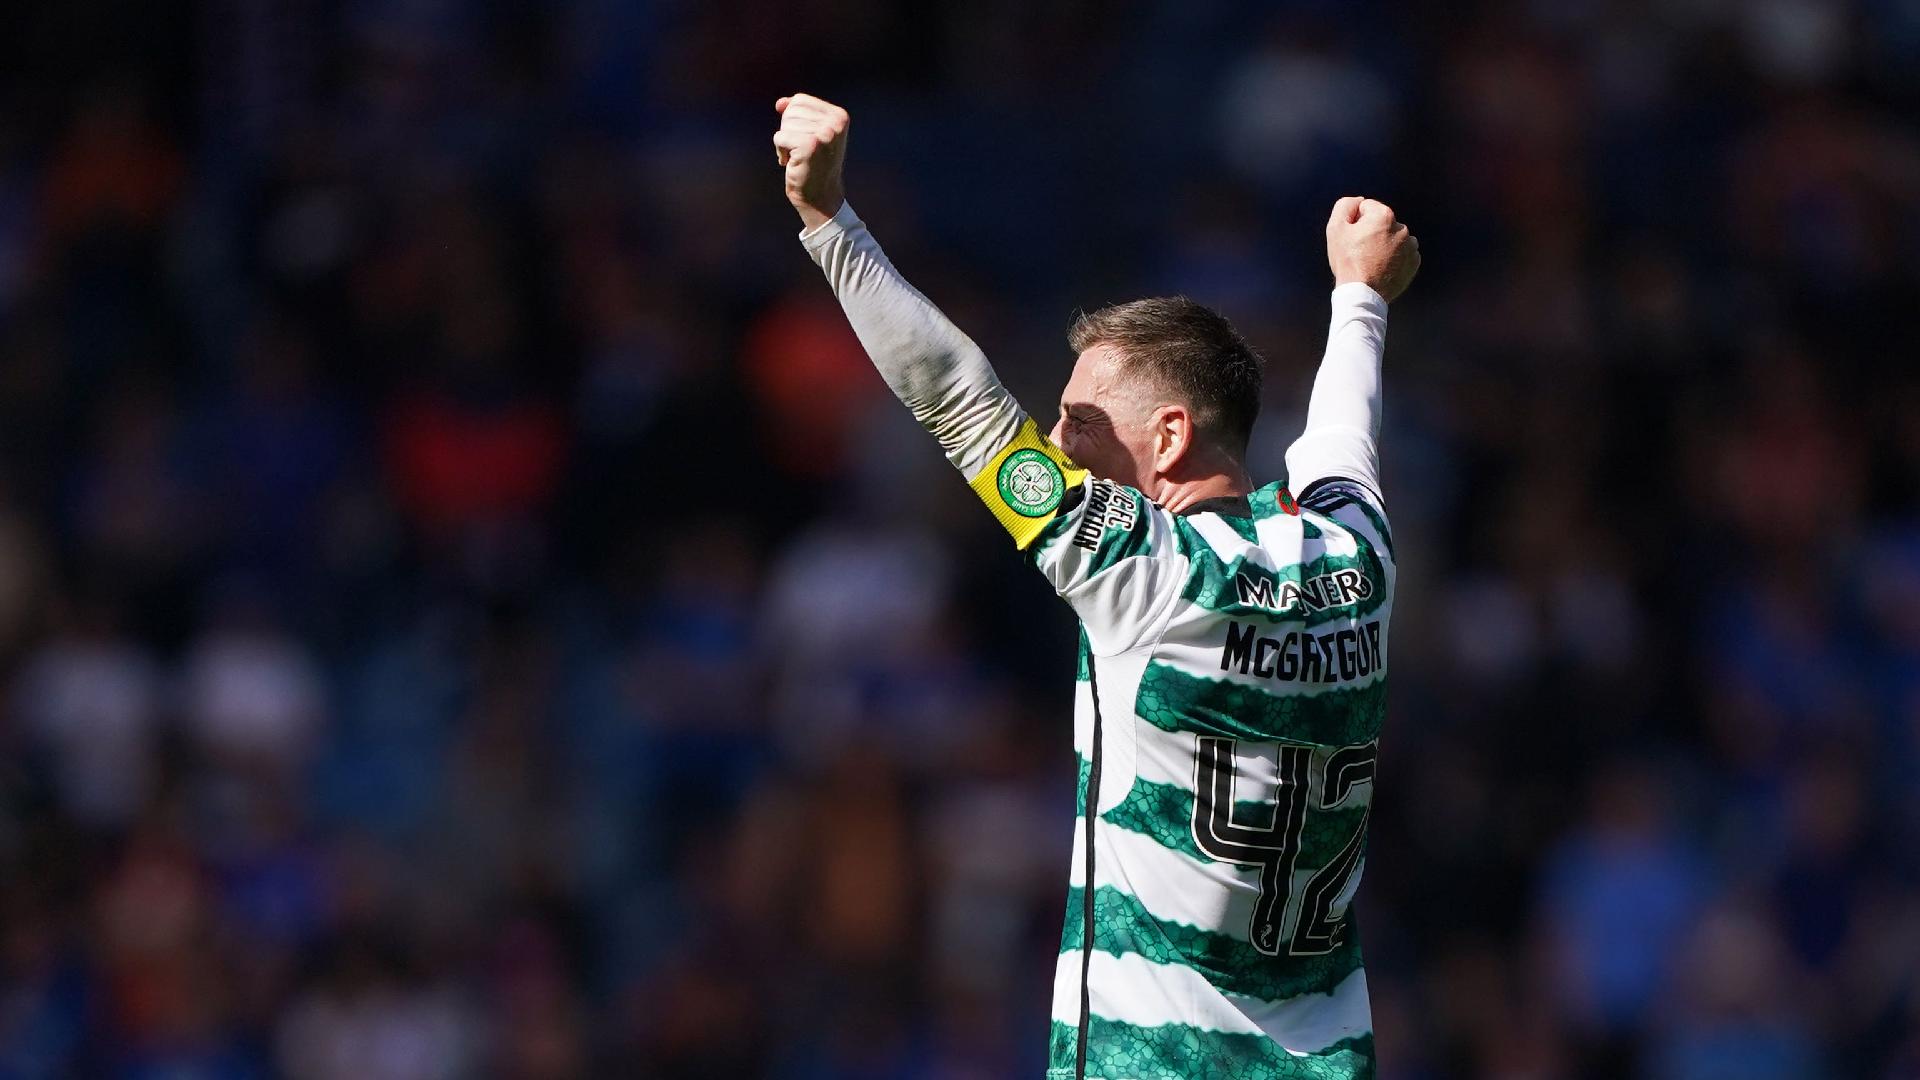 Callum McGregor says lack of support means Celtic’s Old Firm win tastes sweeter